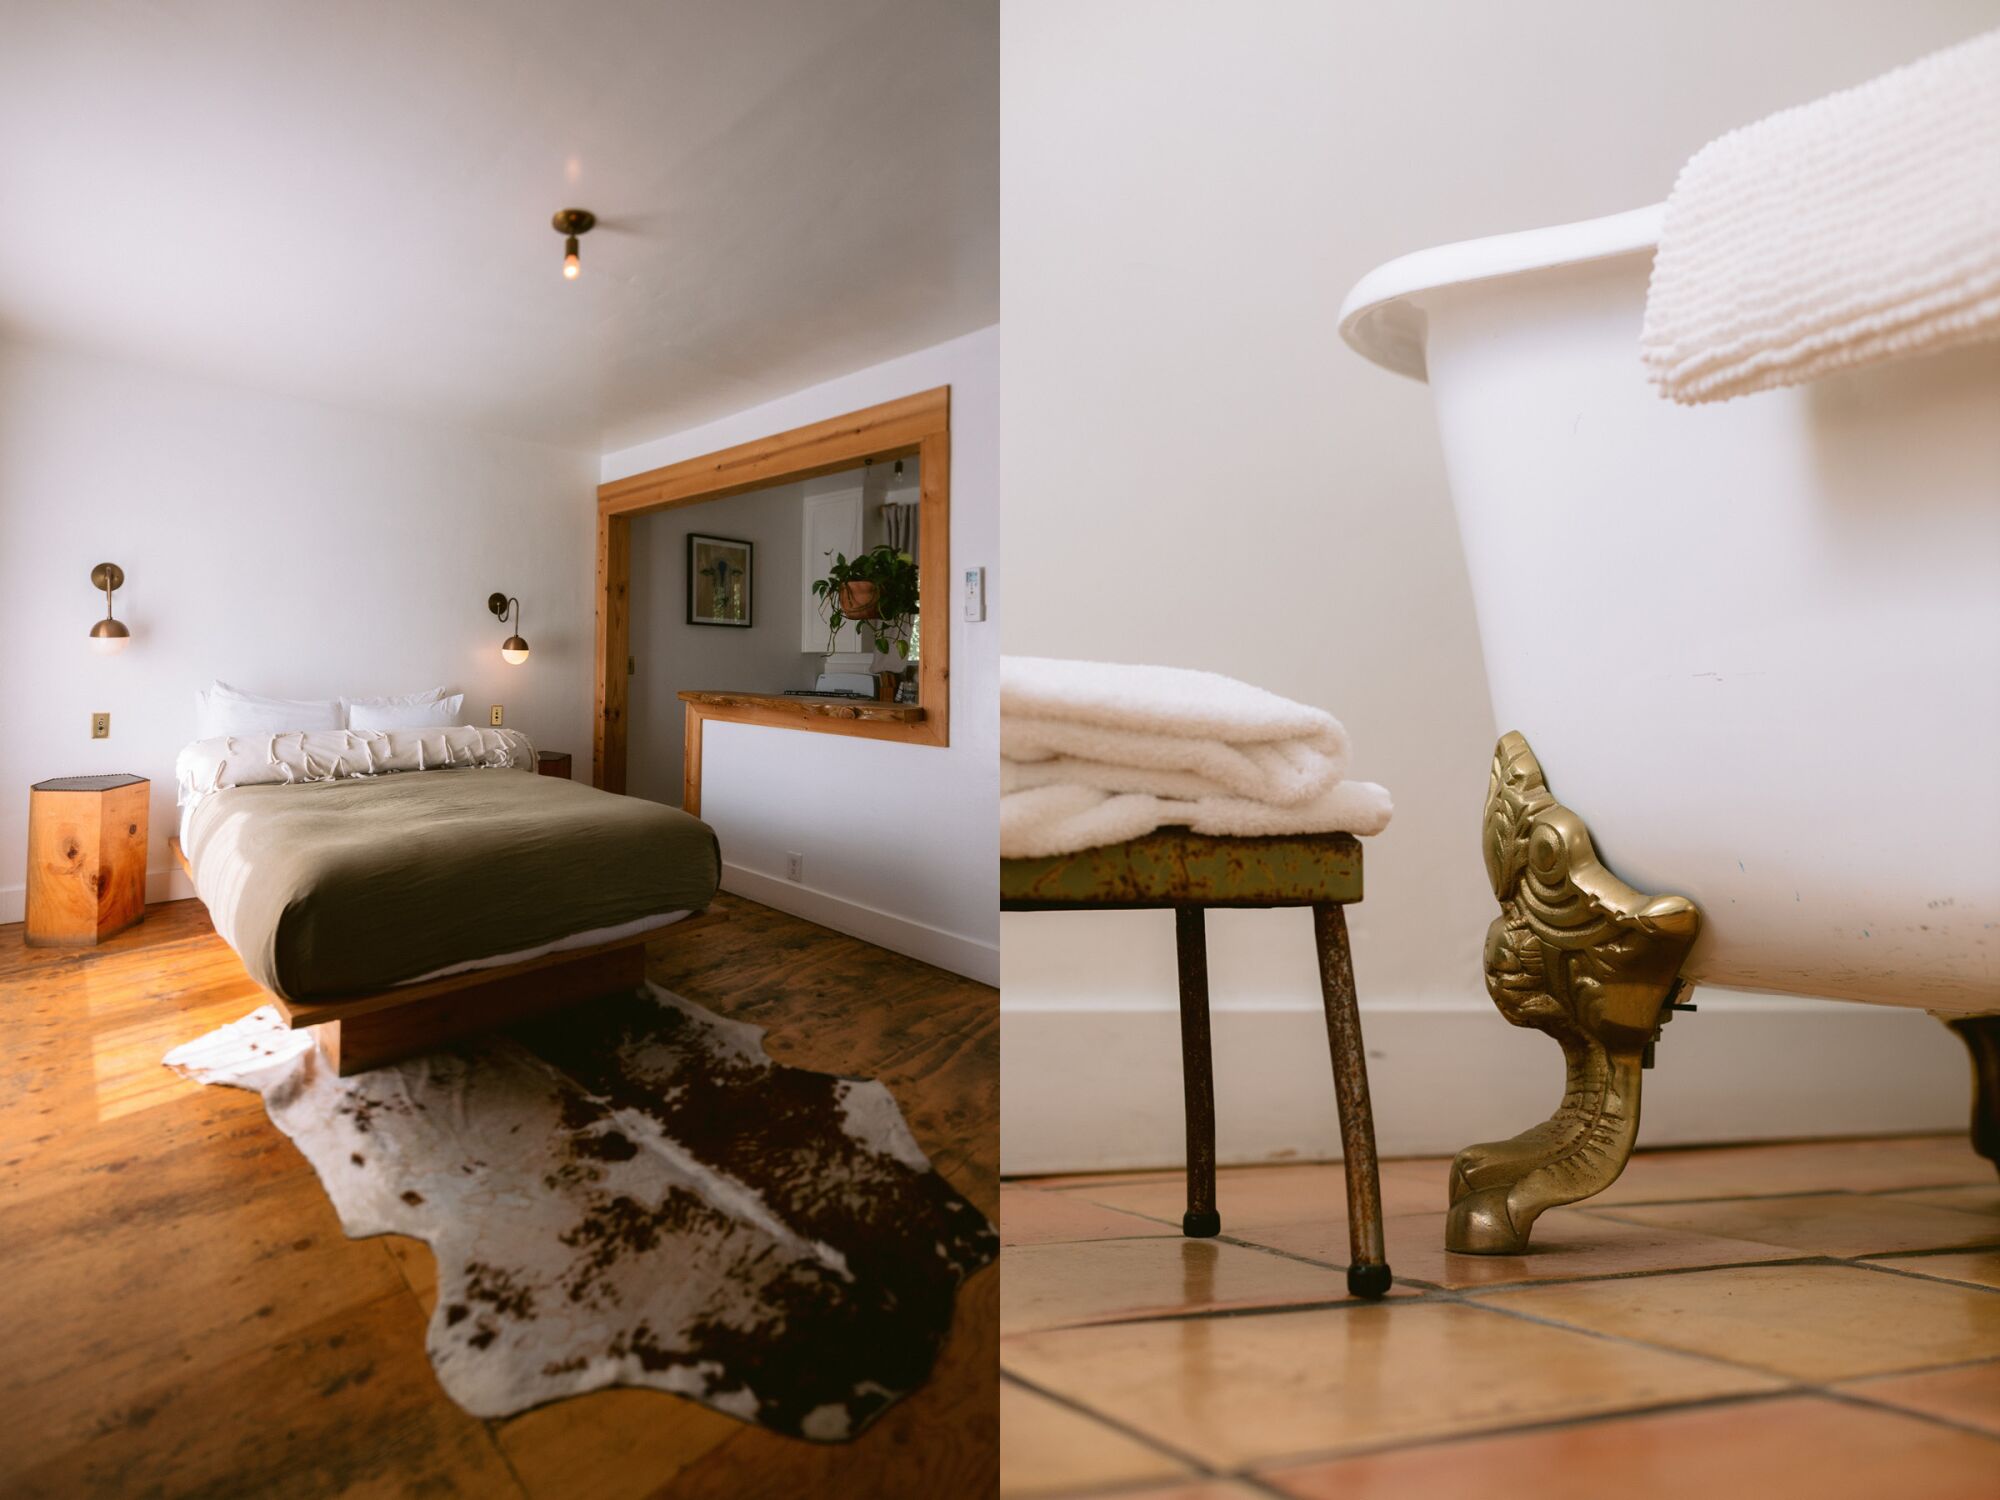 Two photos side by side of the inside of a hotel room, left, and a detail of a claw footed bathtub, right.